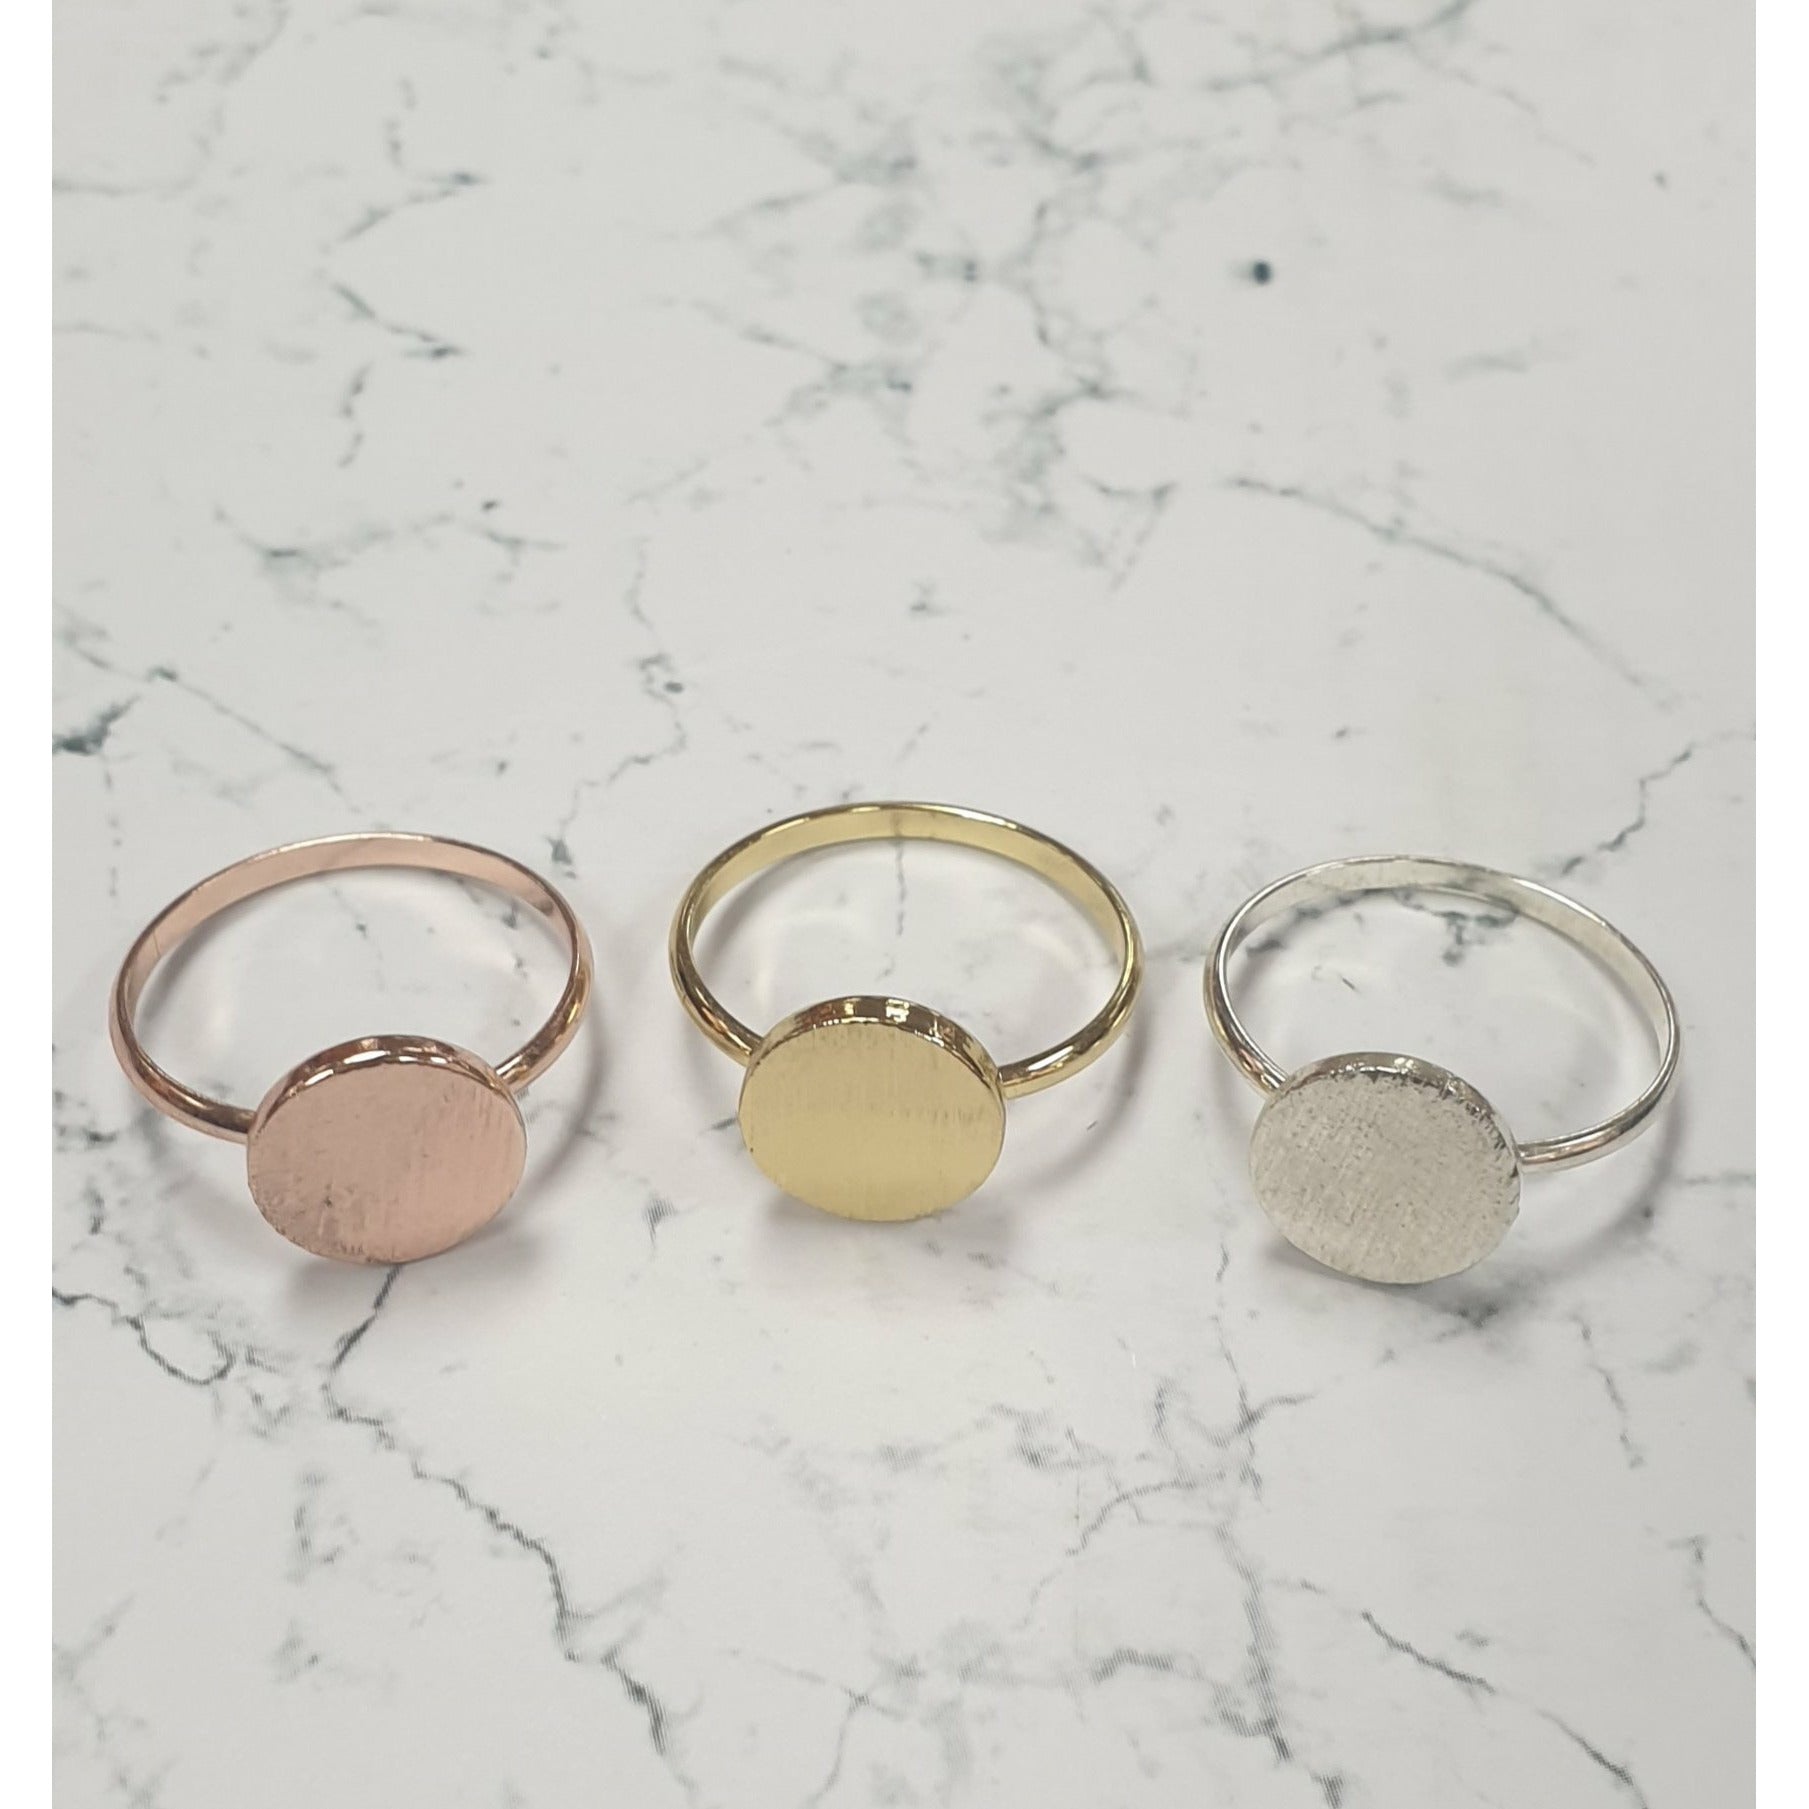 The Willow Collective - Brushed Circle Ring The Willow Collective